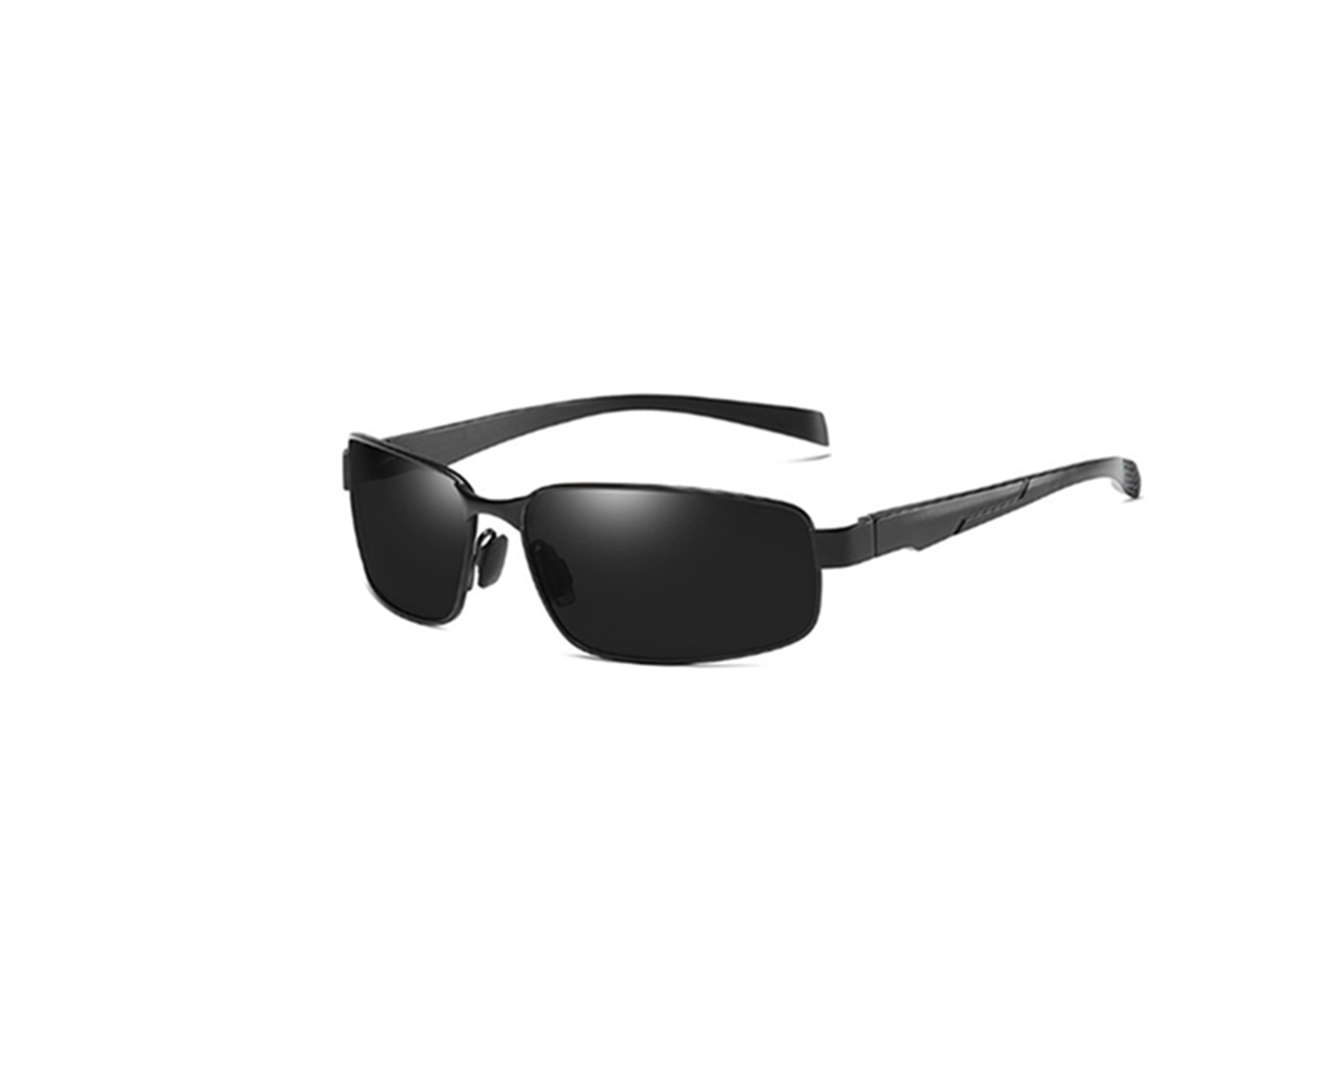 Polarized Sports Sunglasses for Men Outdoor Driving Glasses Shades - 1